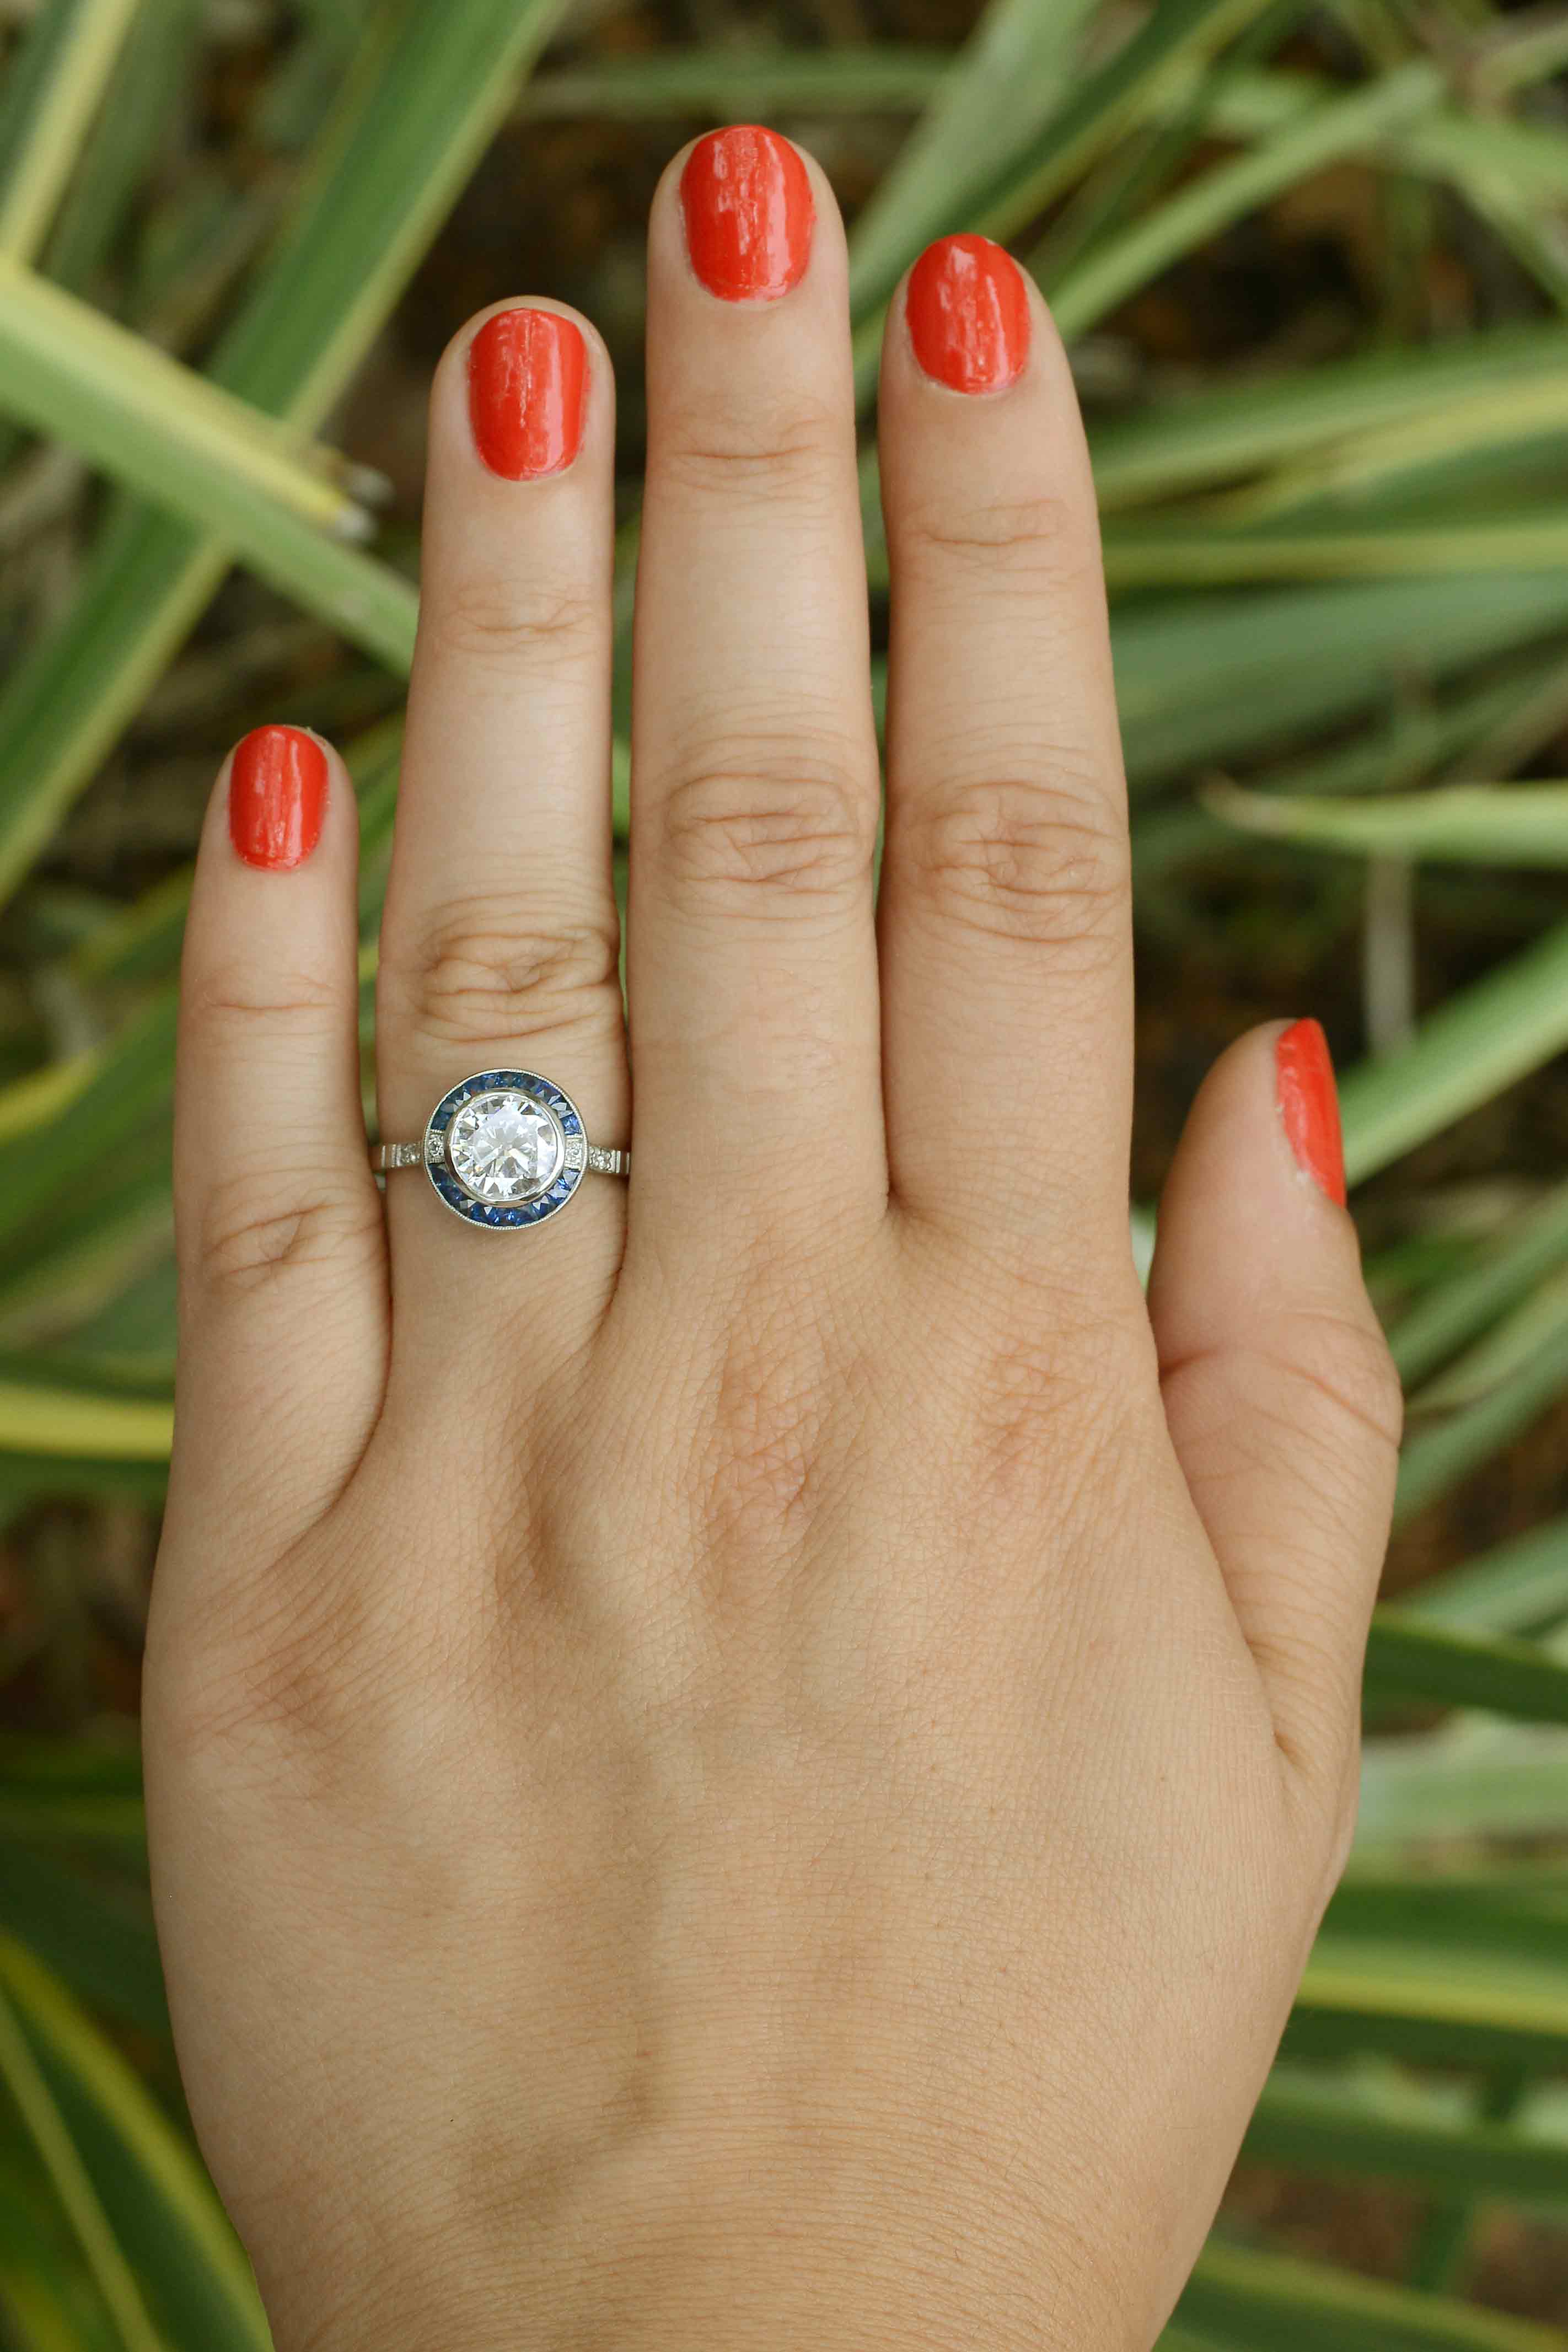 This ring design is a faithful emulation of a 1920's Jazz Age heirloom.